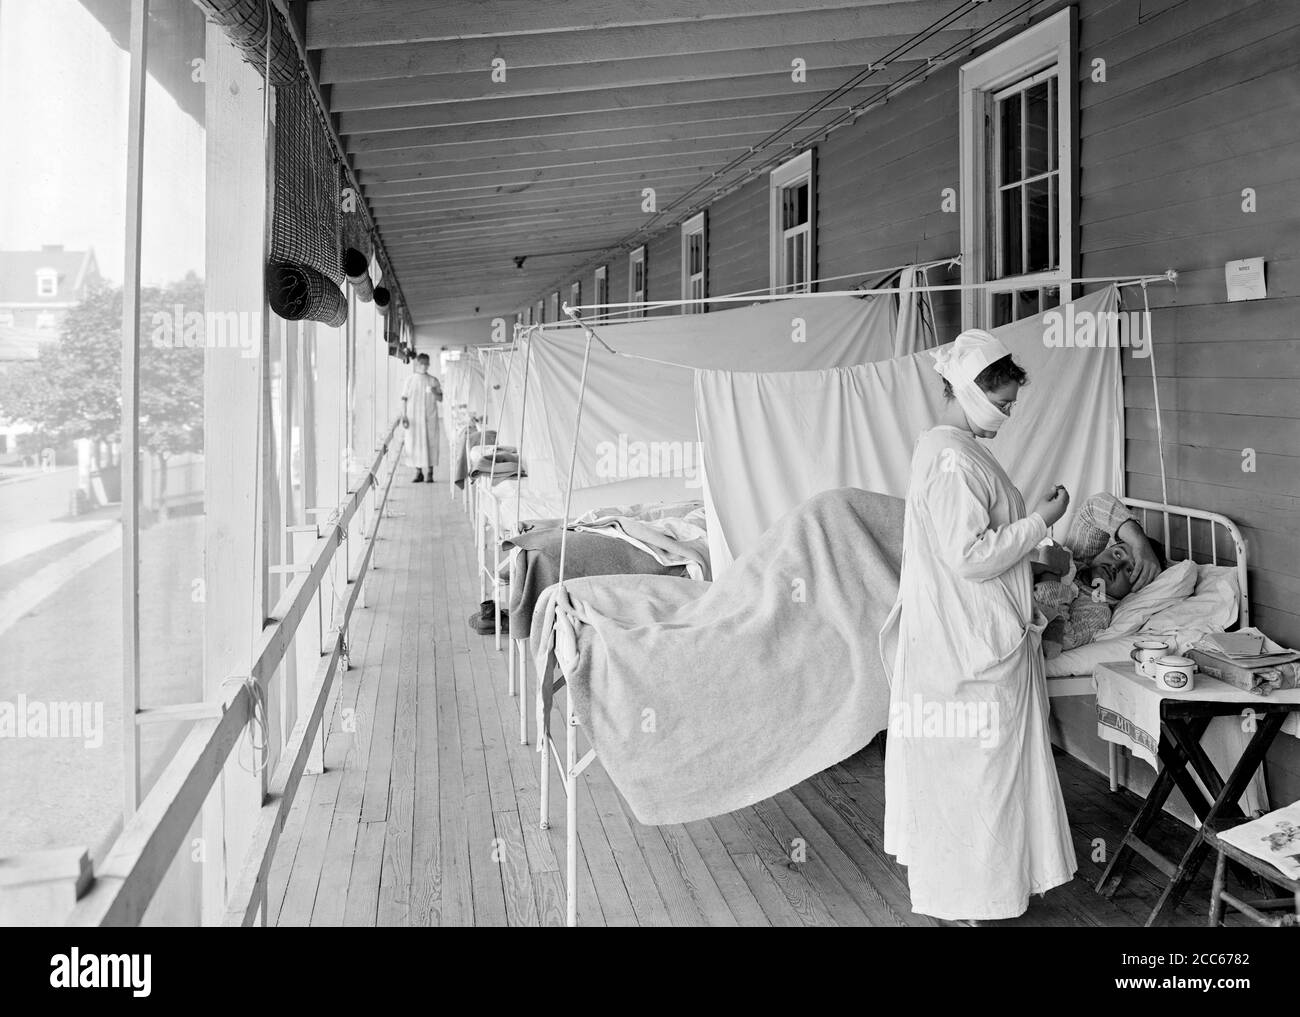 Influenza ward at the Walter Reed Hospital in Washington DC during the Spanish Flu pandemic of 1918. Photograph by Harris and Ewing, November 1918. Stock Photo